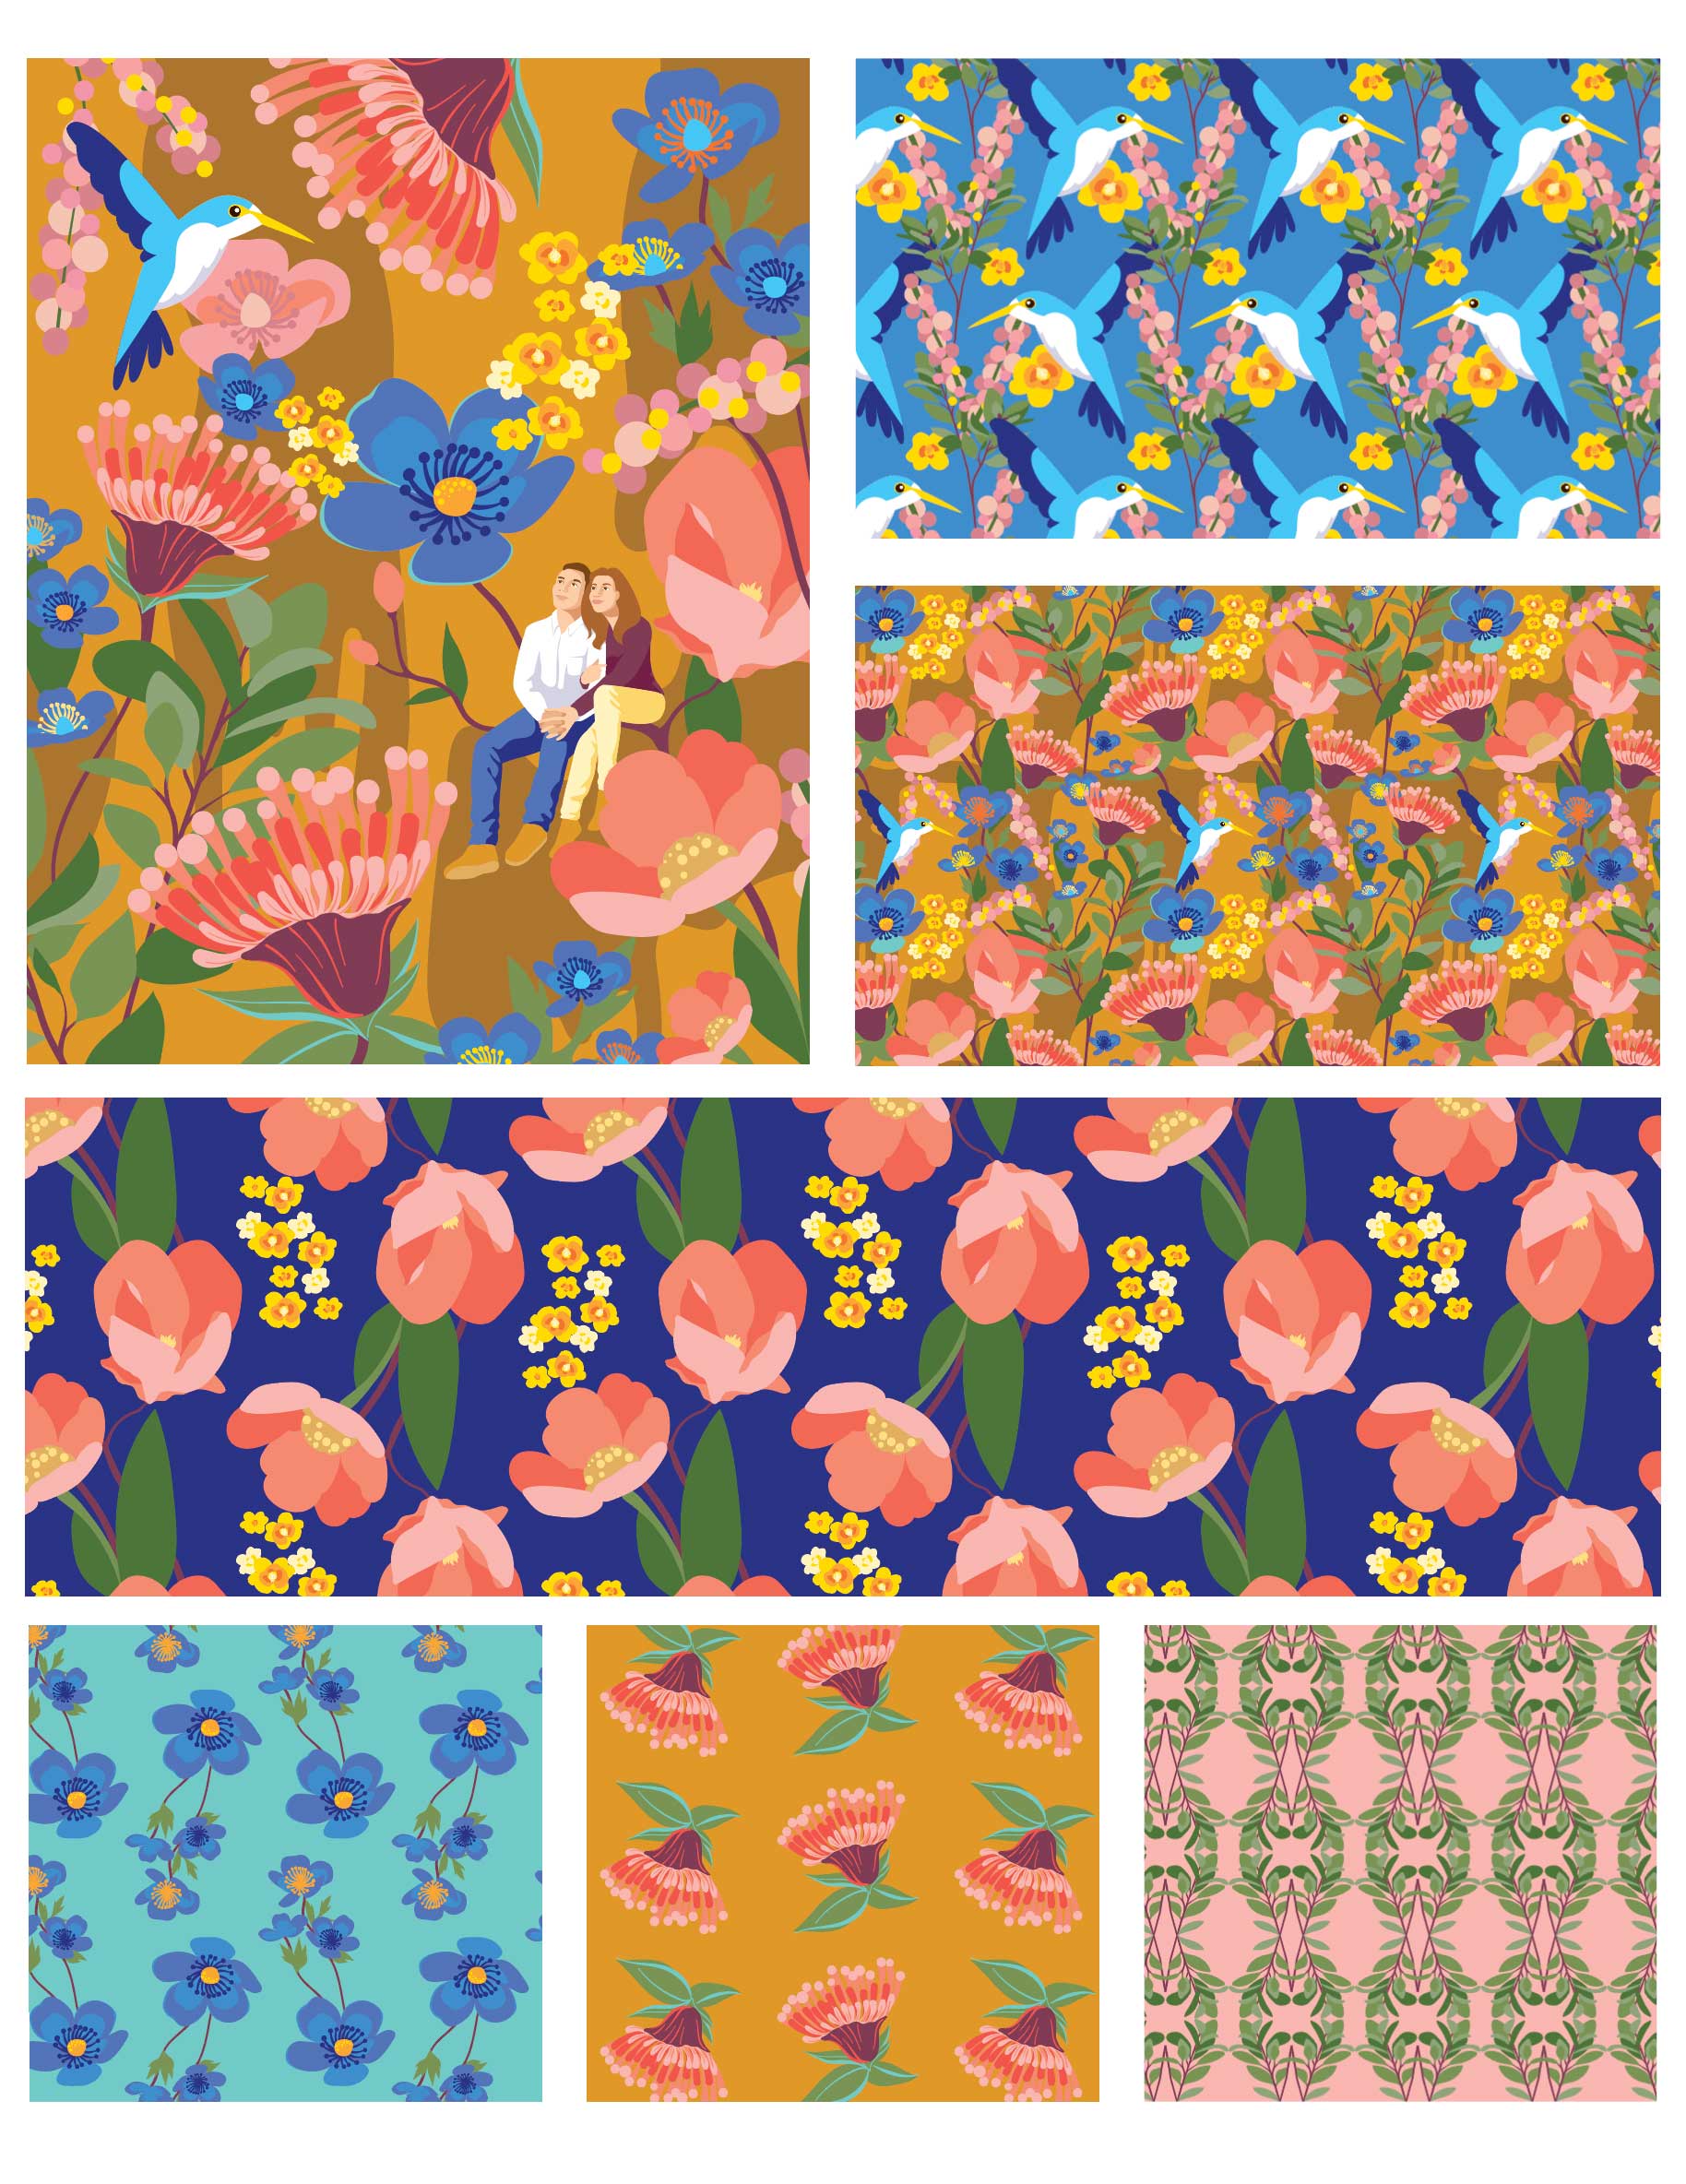 Mona_Daly_Illustrations_Patterns_floral_birds_people